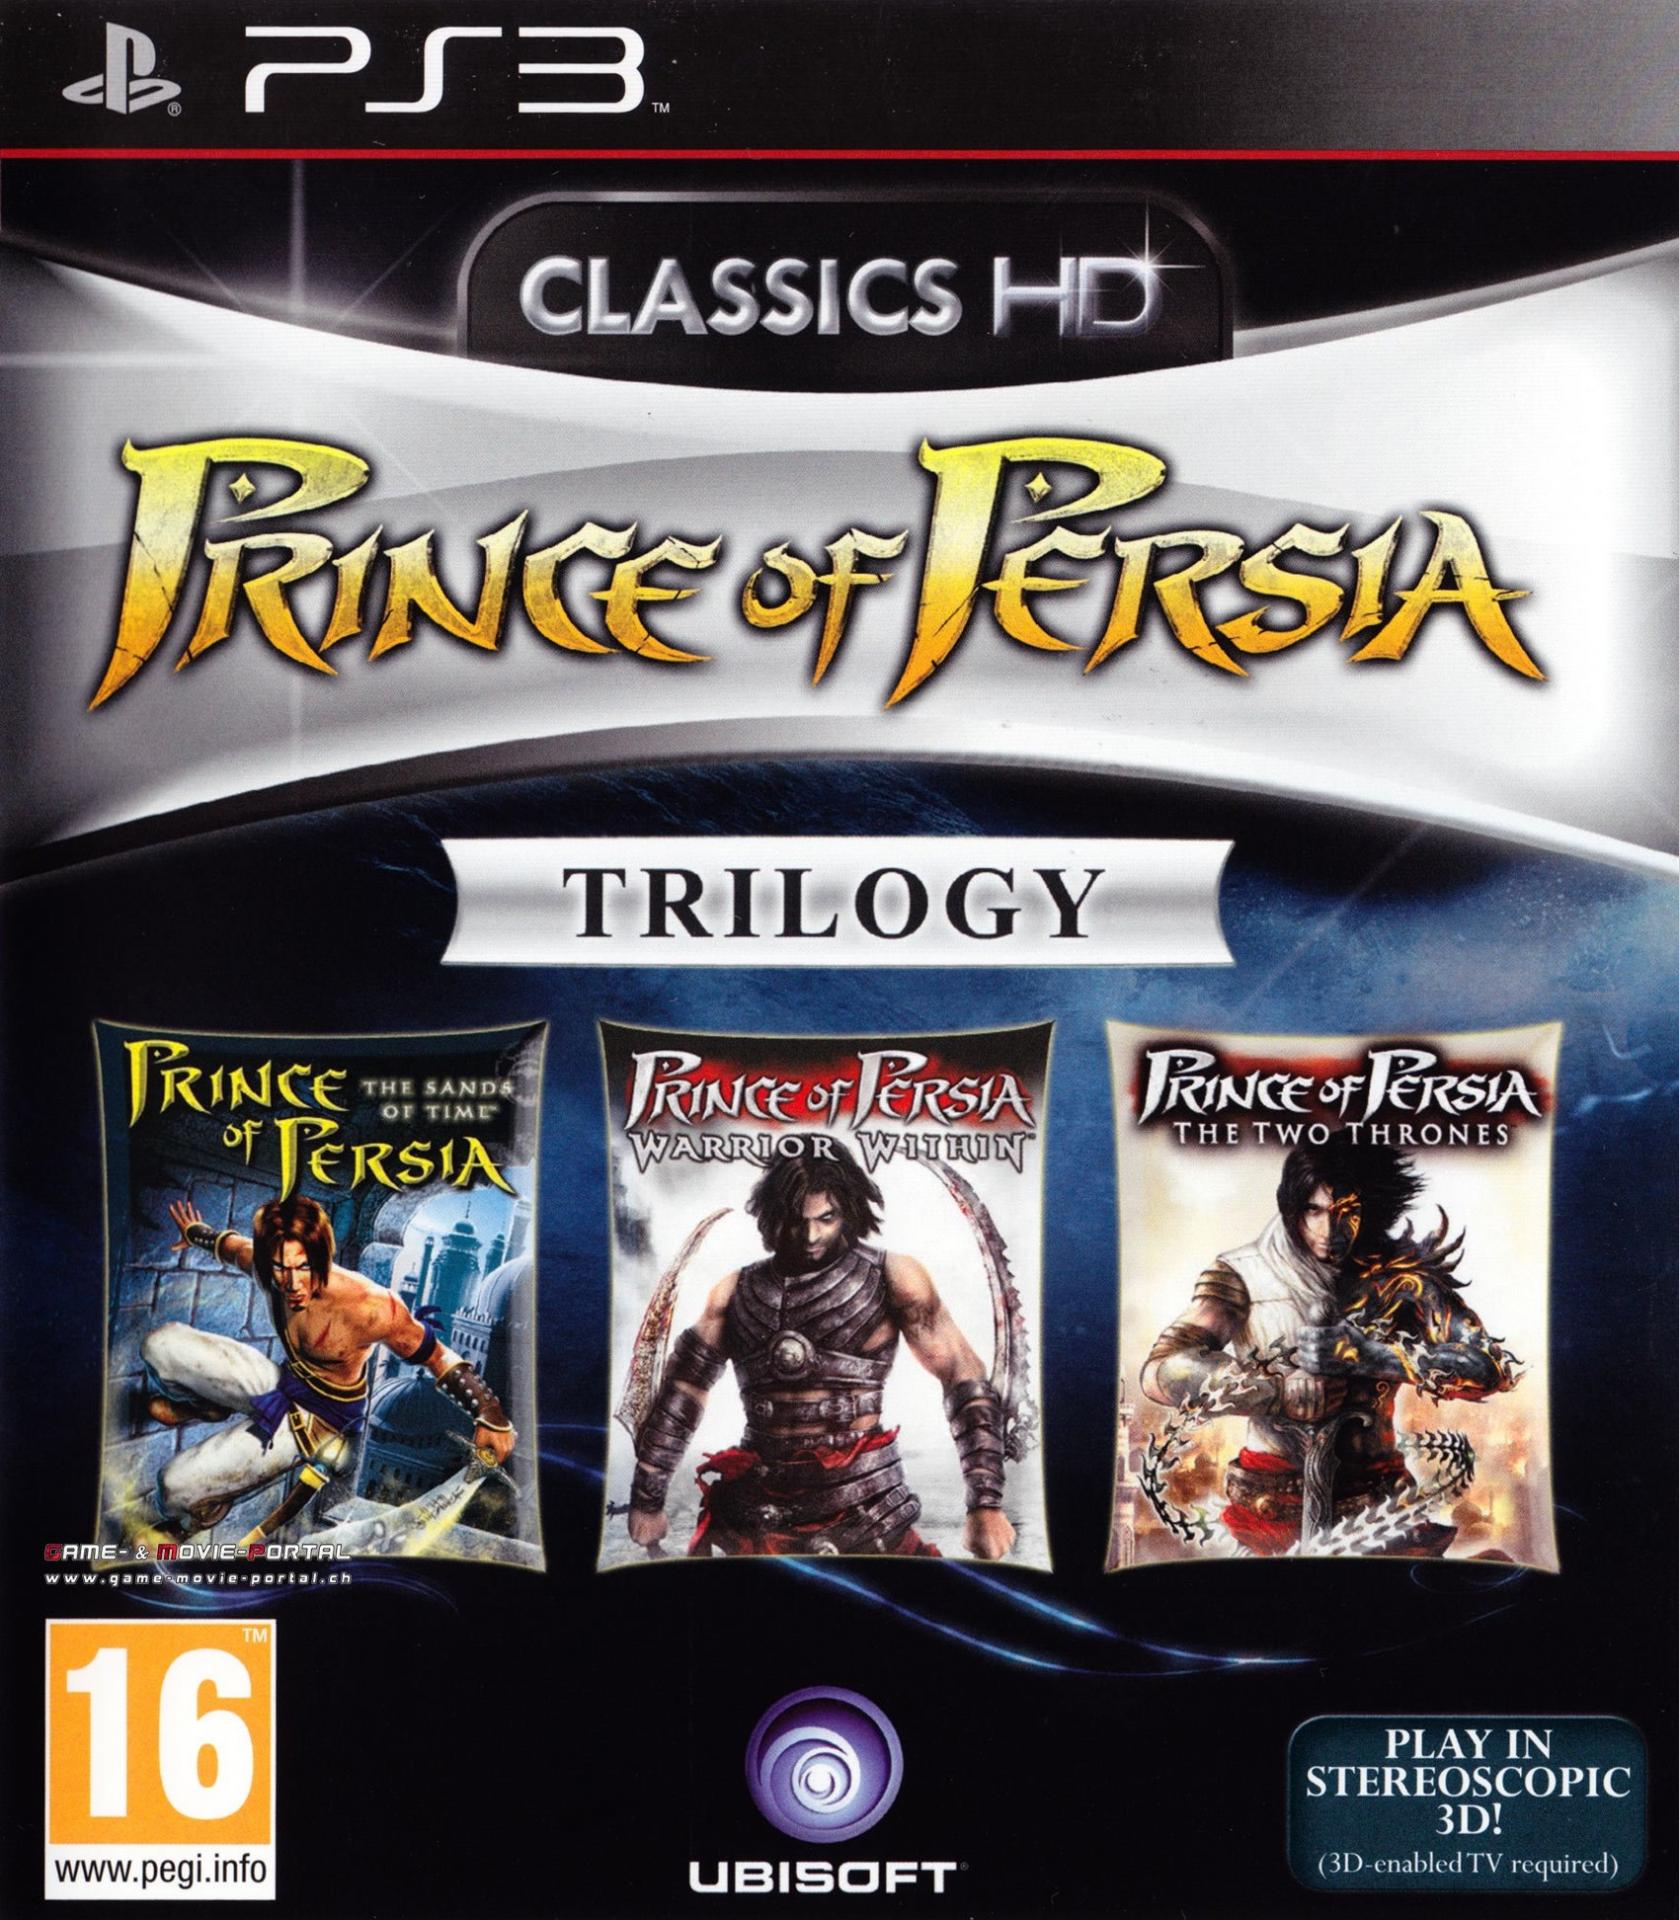 Prince of persia trilogy